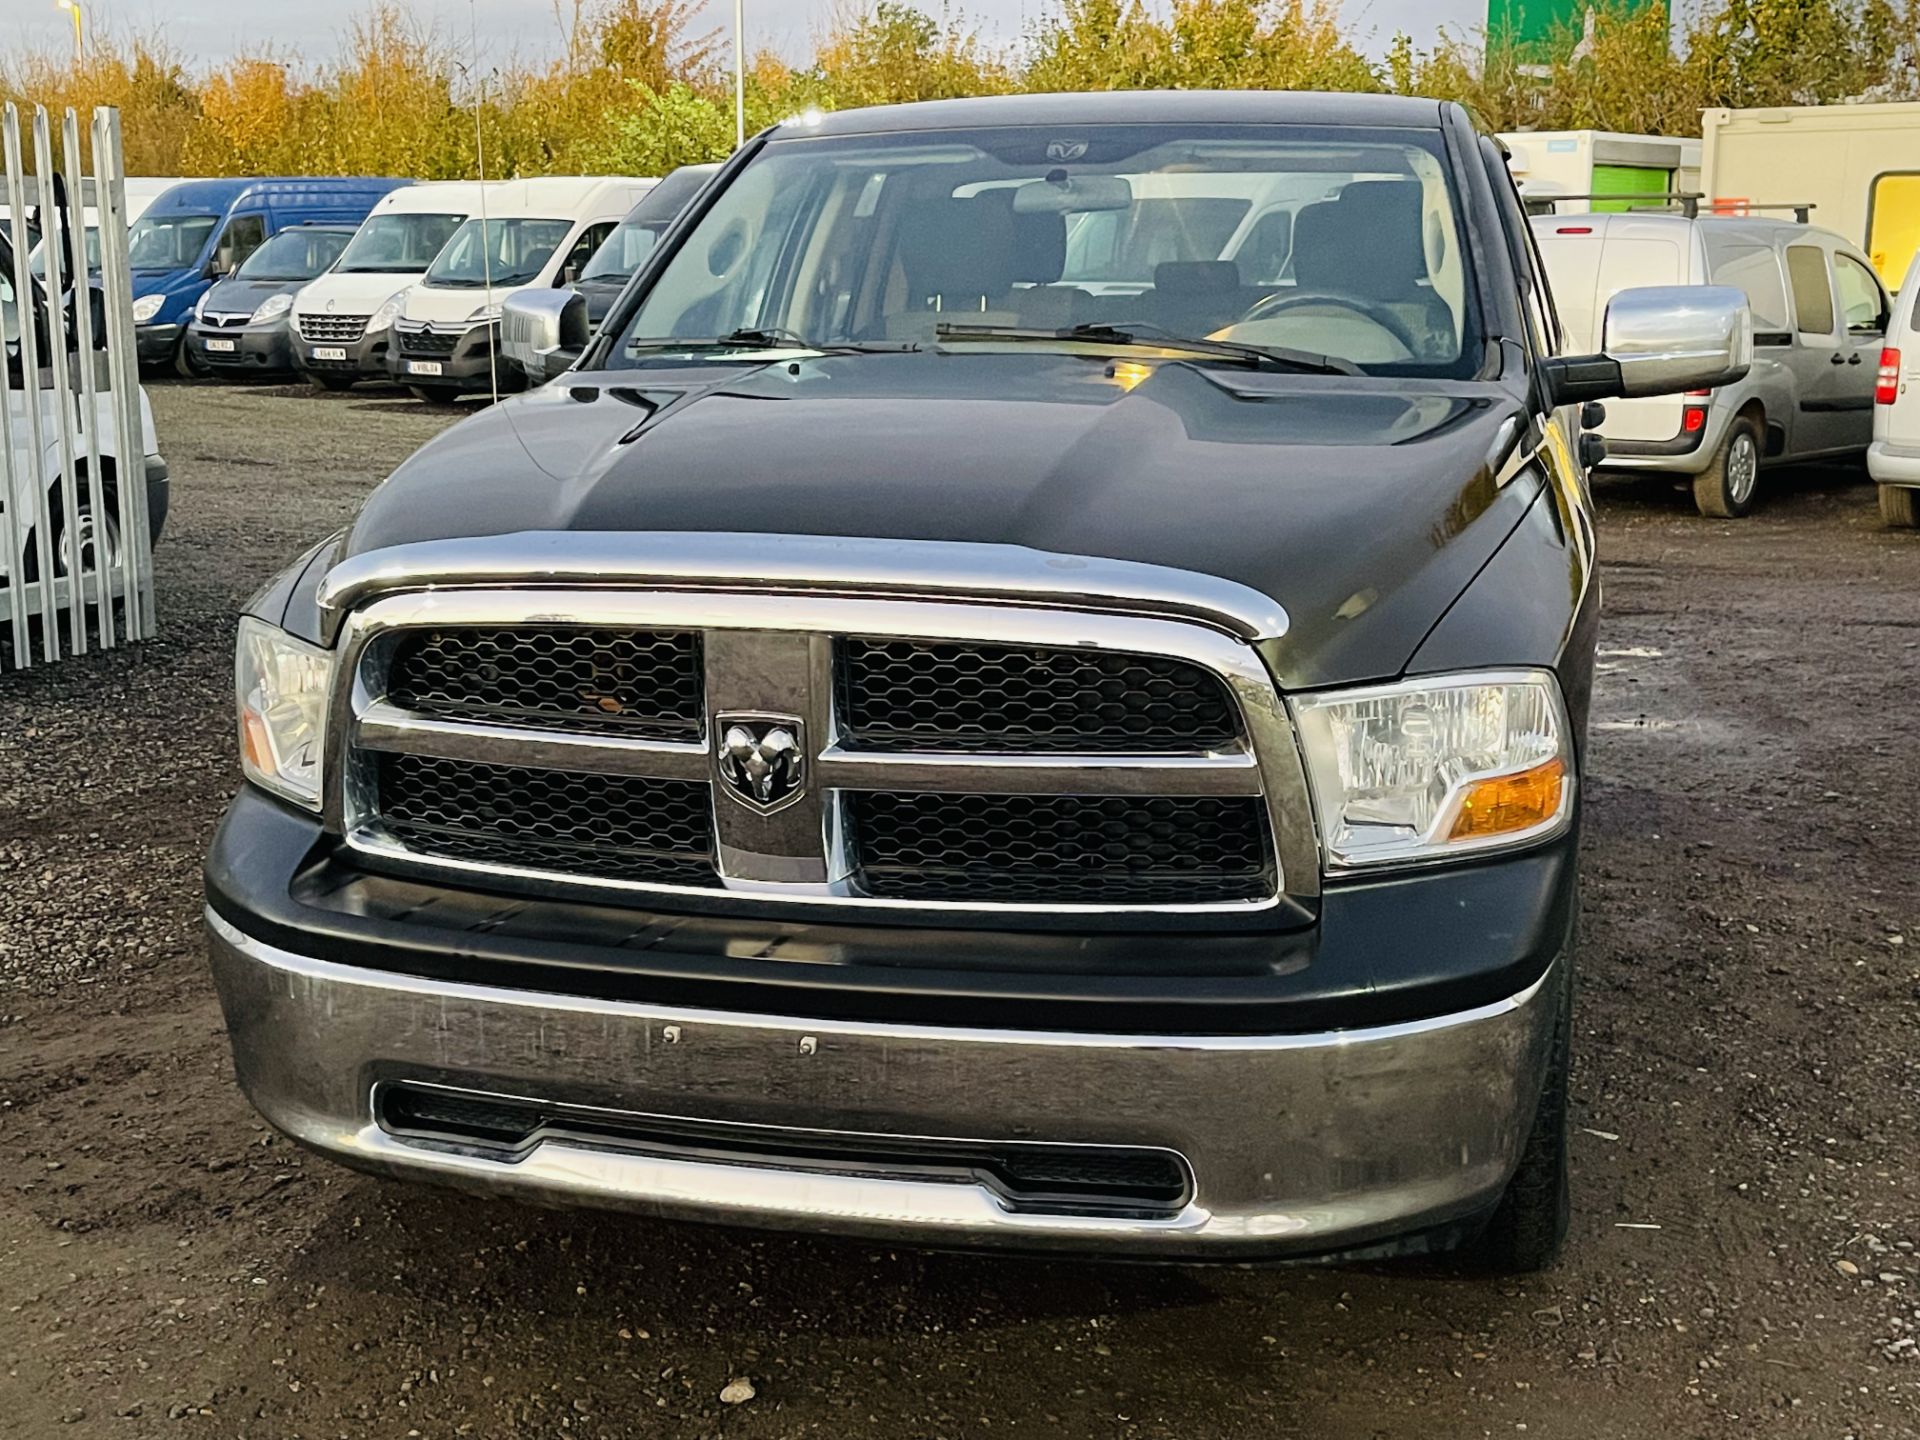 ** ON SALE **Dodge Ram 4.7 V8 1500 ST 4WD ' 2012 Year ' A/C - Cruise Control - 6 Seats Chrome Pack - Image 3 of 27